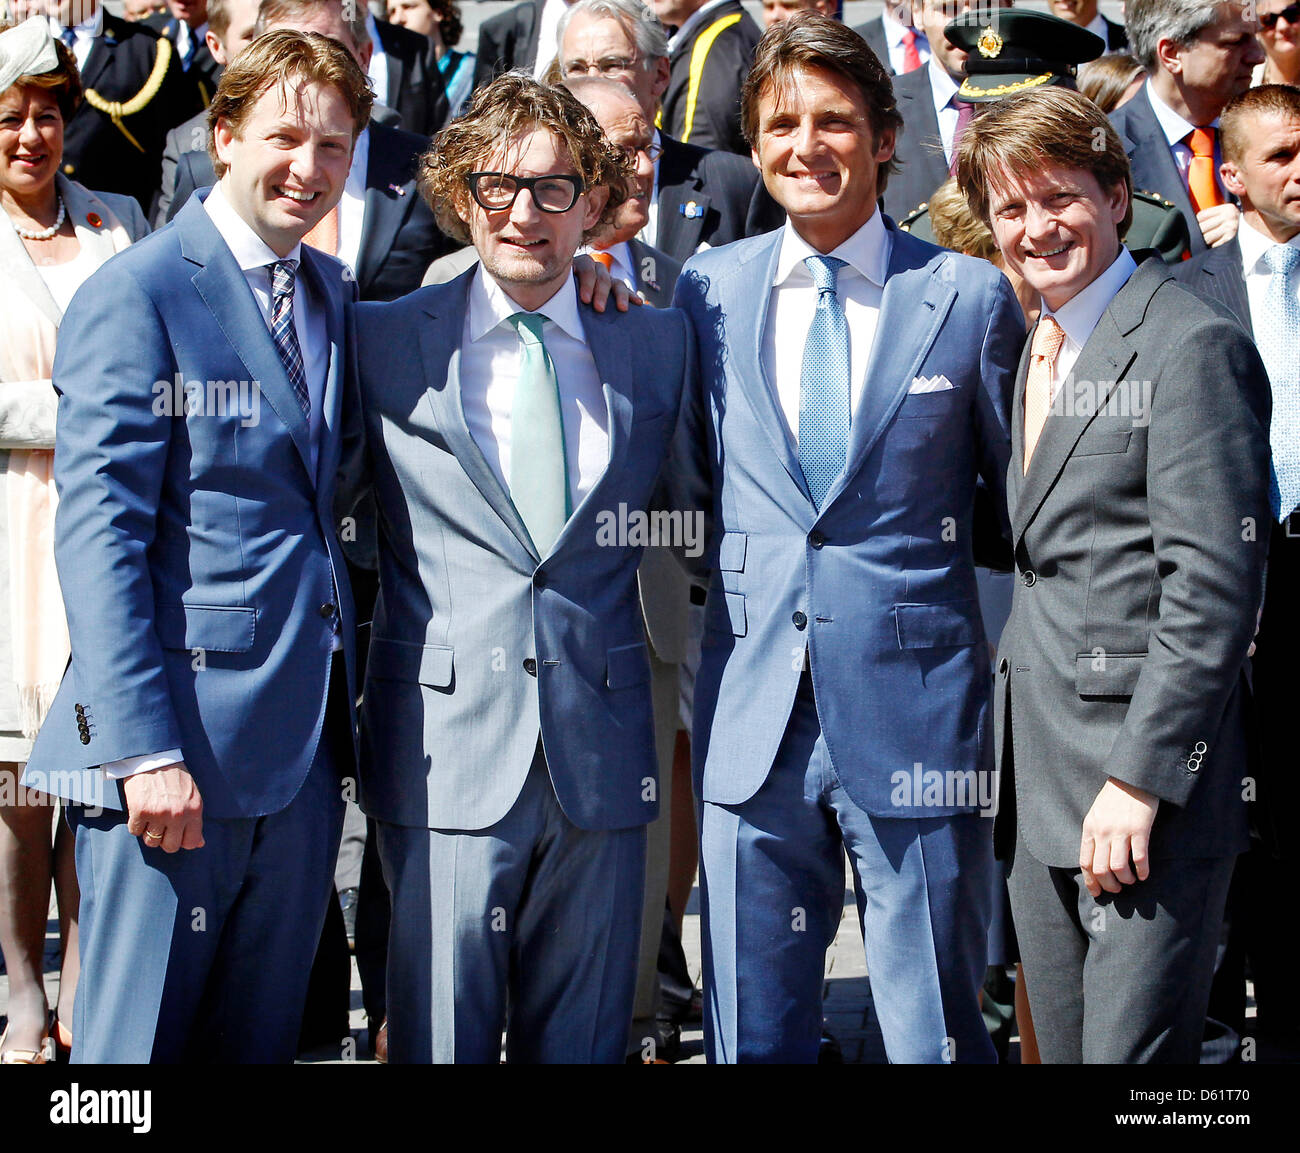 Dutch Prince Floris (L-R), Prince Bernhard, Prince Maurits and Prince Pieter Christiaan during for the Queen's Day celebration in Rhenen, The Netherlands, 30 April 2012. Queen's Day celebrates the birthday of the Queen of the Netherlands. Queen's Day is a national holiday in the Netherlands, on the 30th April (or on the 29th if the 30th is a Sunday). The tradition started on 31 Aug Stock Photo